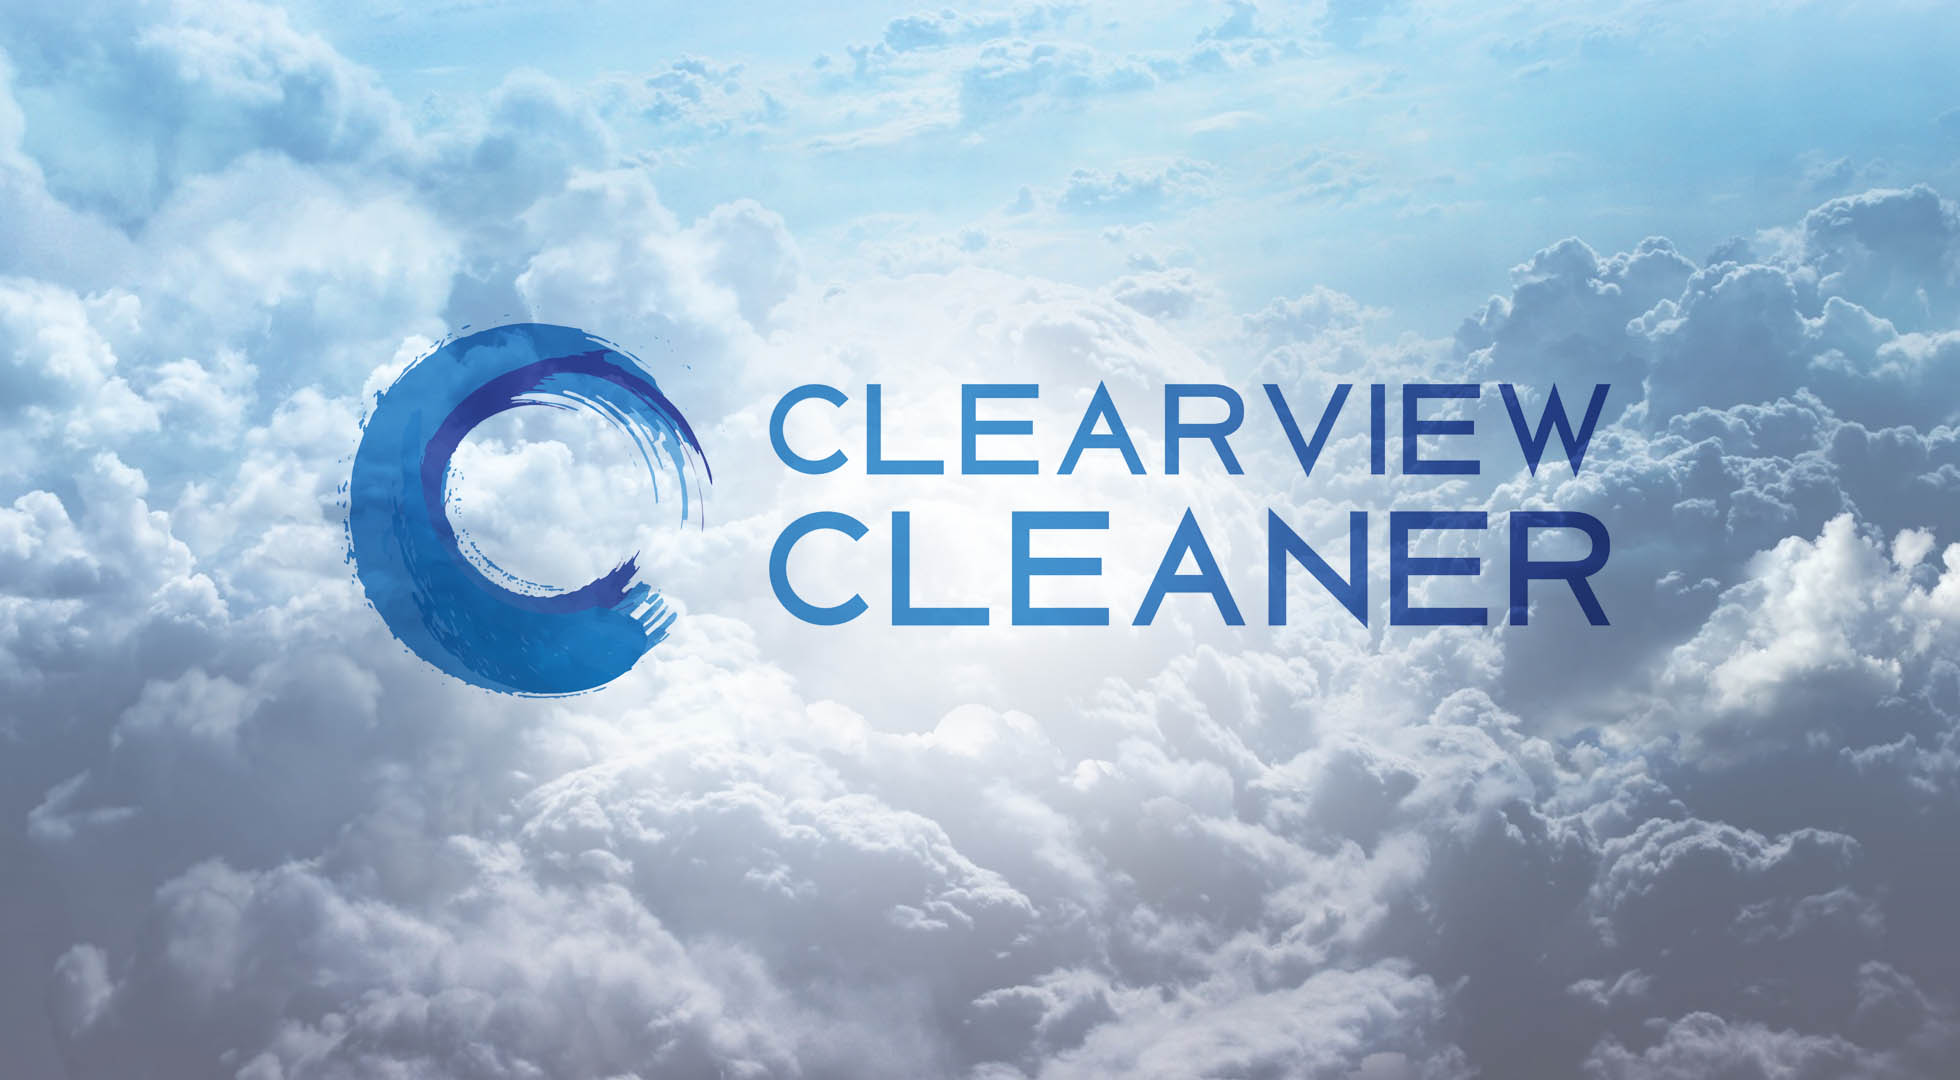 (c) Clearviewcleaner.co.uk